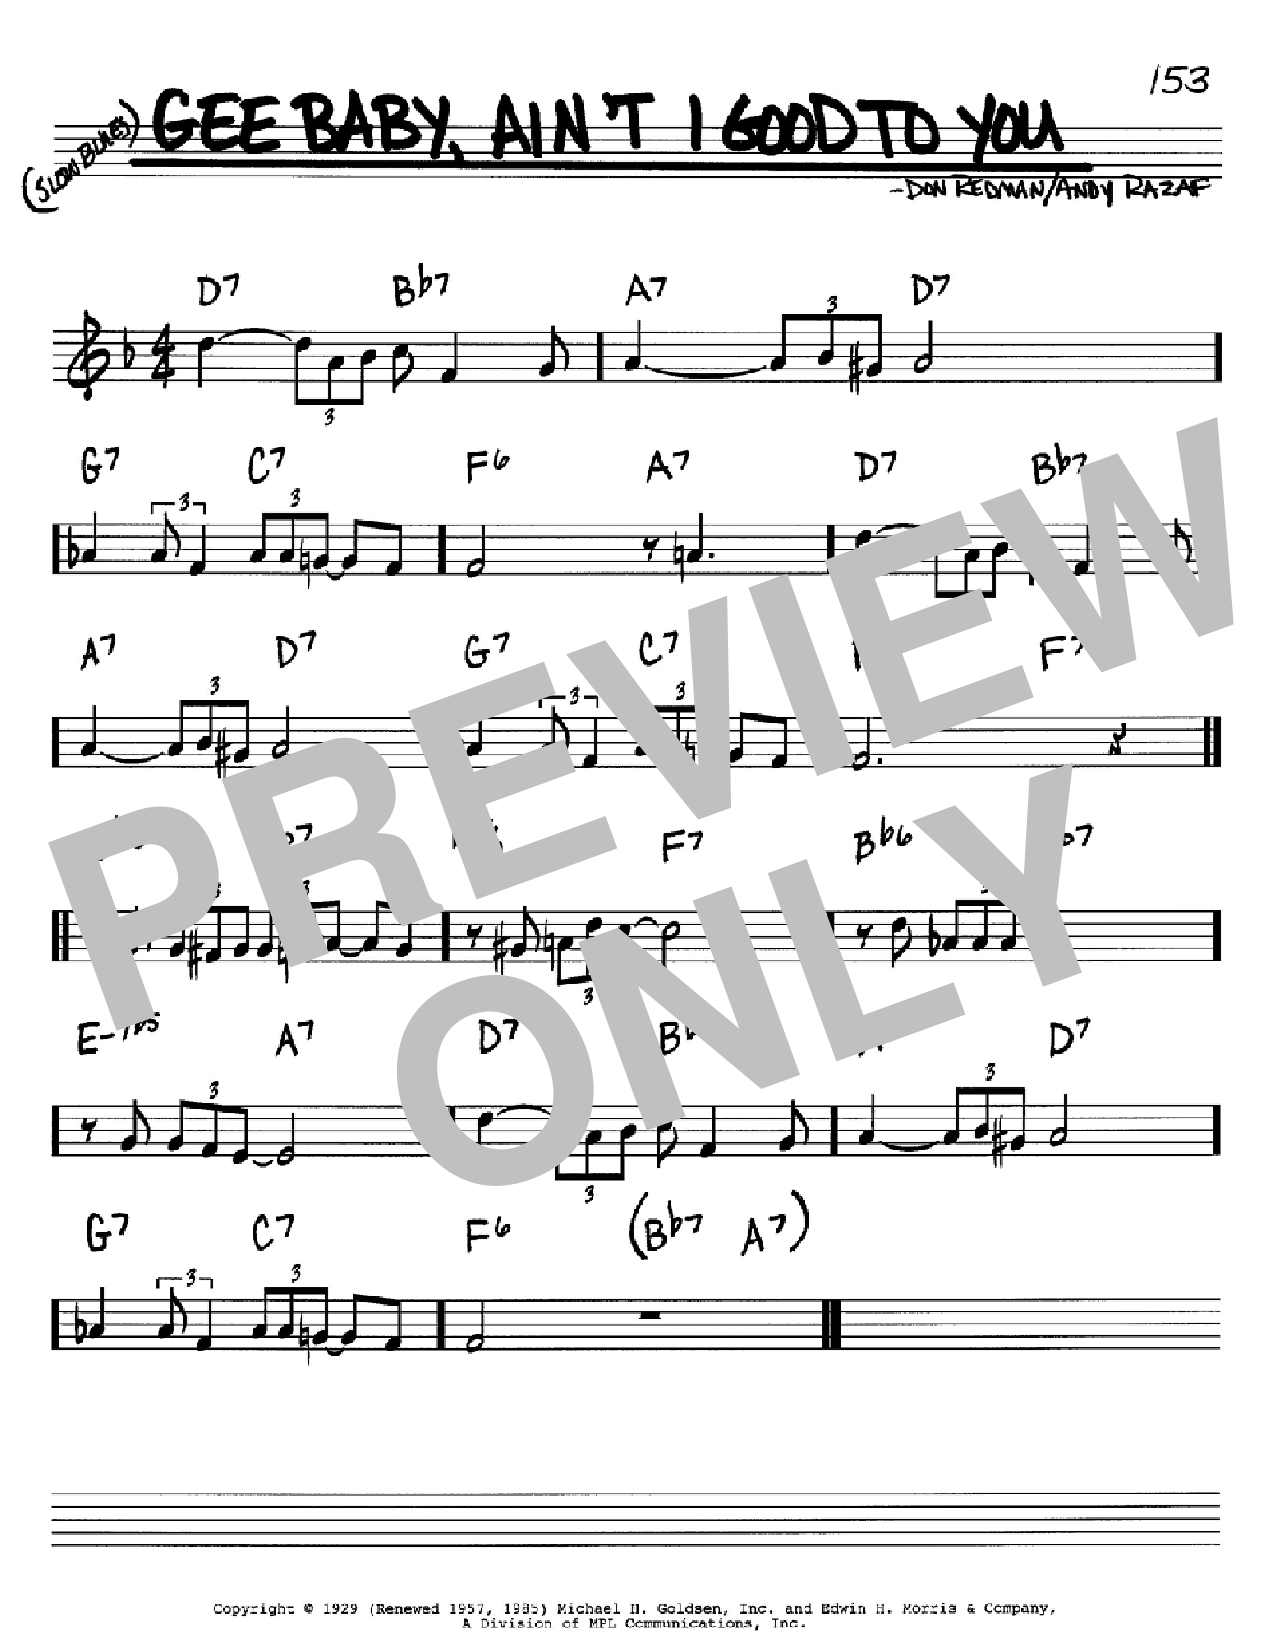 Download Don Redman Gee Baby, Ain't I Good To You Sheet Music